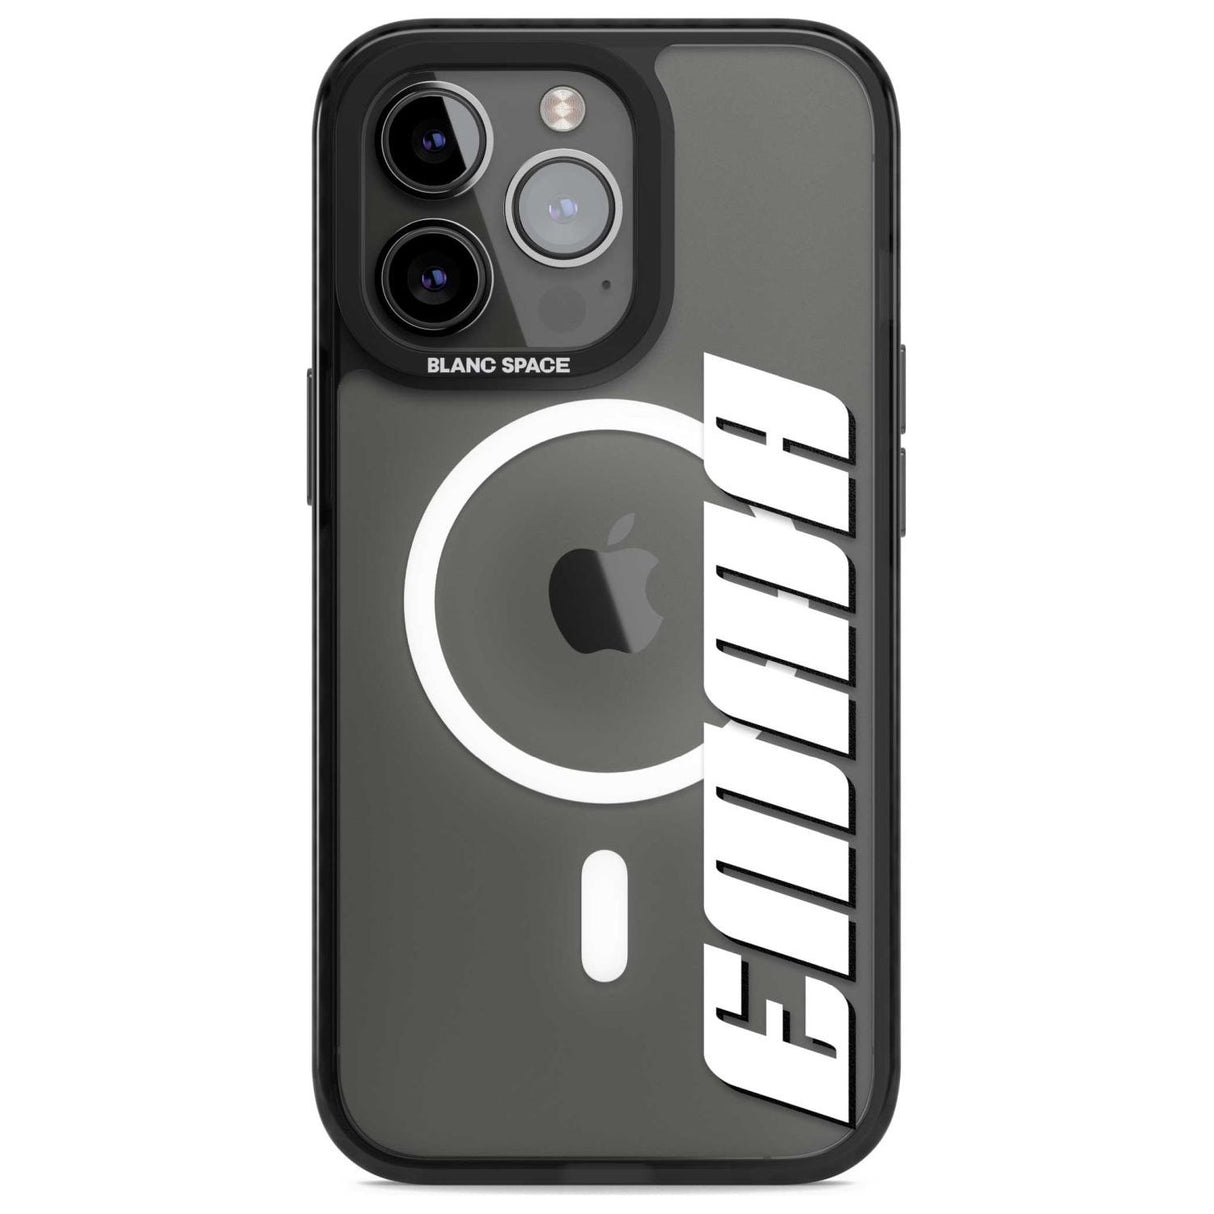 Personalised Clear Text  4B Custom Phone Case iPhone 15 Pro Max / Magsafe Black Impact Case,iPhone 15 Pro / Magsafe Black Impact Case,iPhone 14 Pro Max / Magsafe Black Impact Case,iPhone 14 Pro / Magsafe Black Impact Case,iPhone 13 Pro / Magsafe Black Impact Case Blanc Space